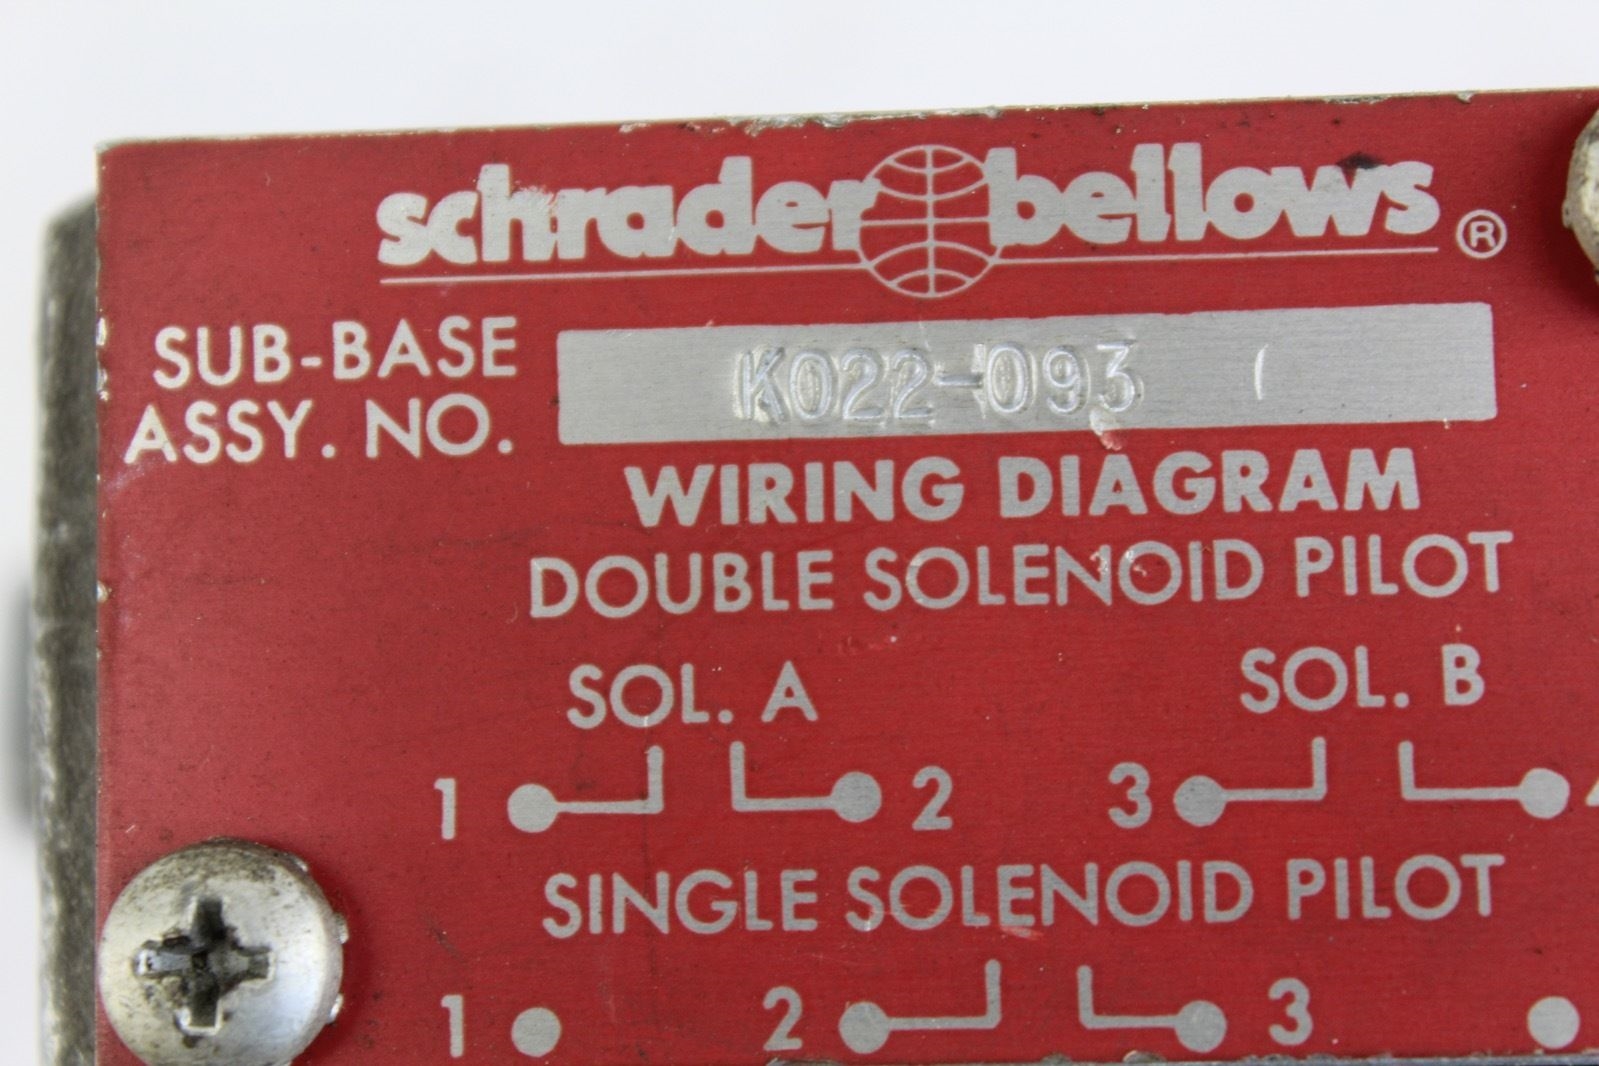 Schrader Bellows K022-093 Sub-Base *USED* (F225) 1